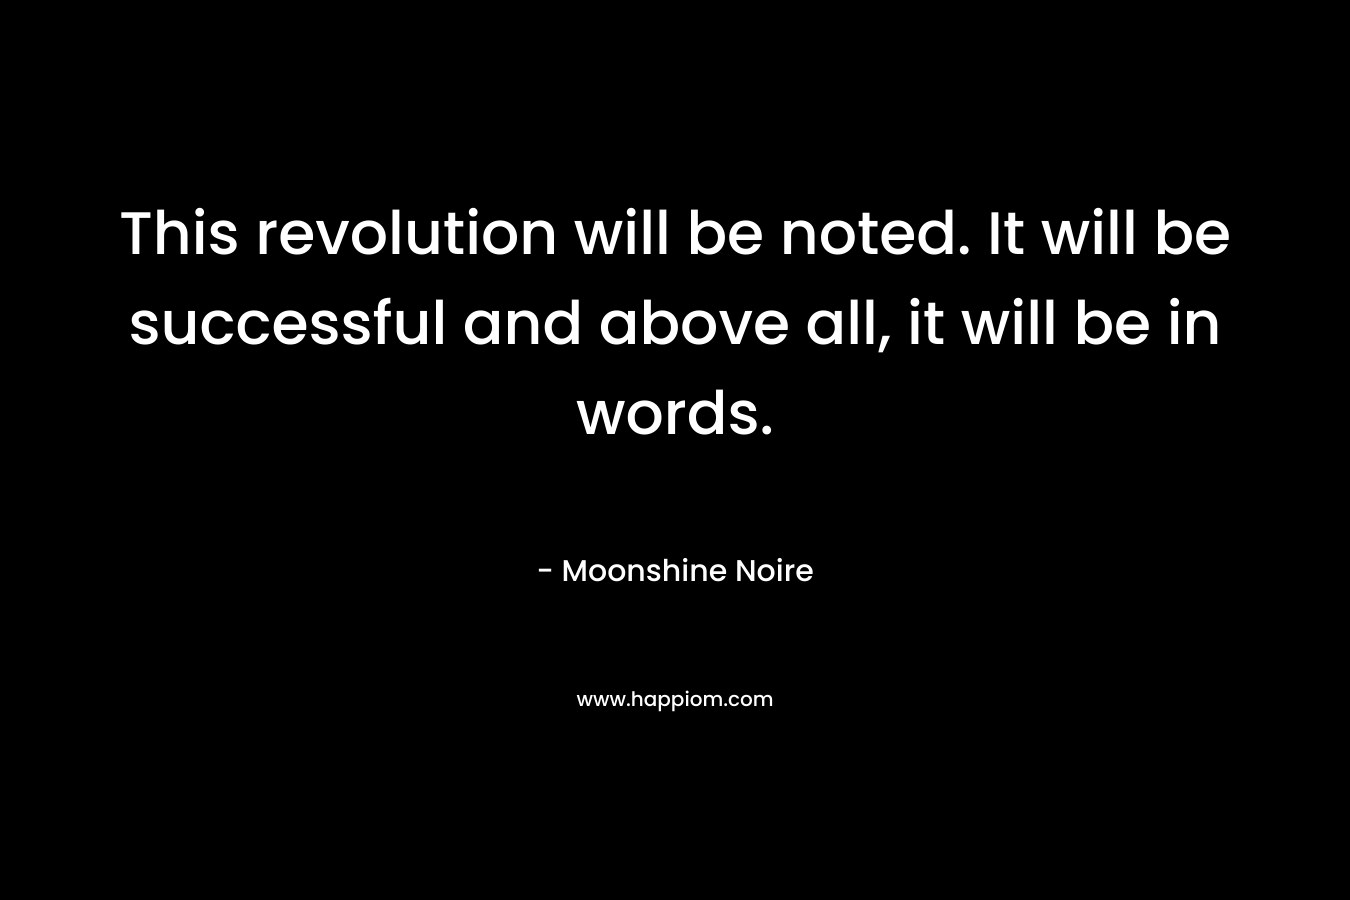 This revolution will be noted. It will be successful and above all, it will be in words. – Moonshine Noire